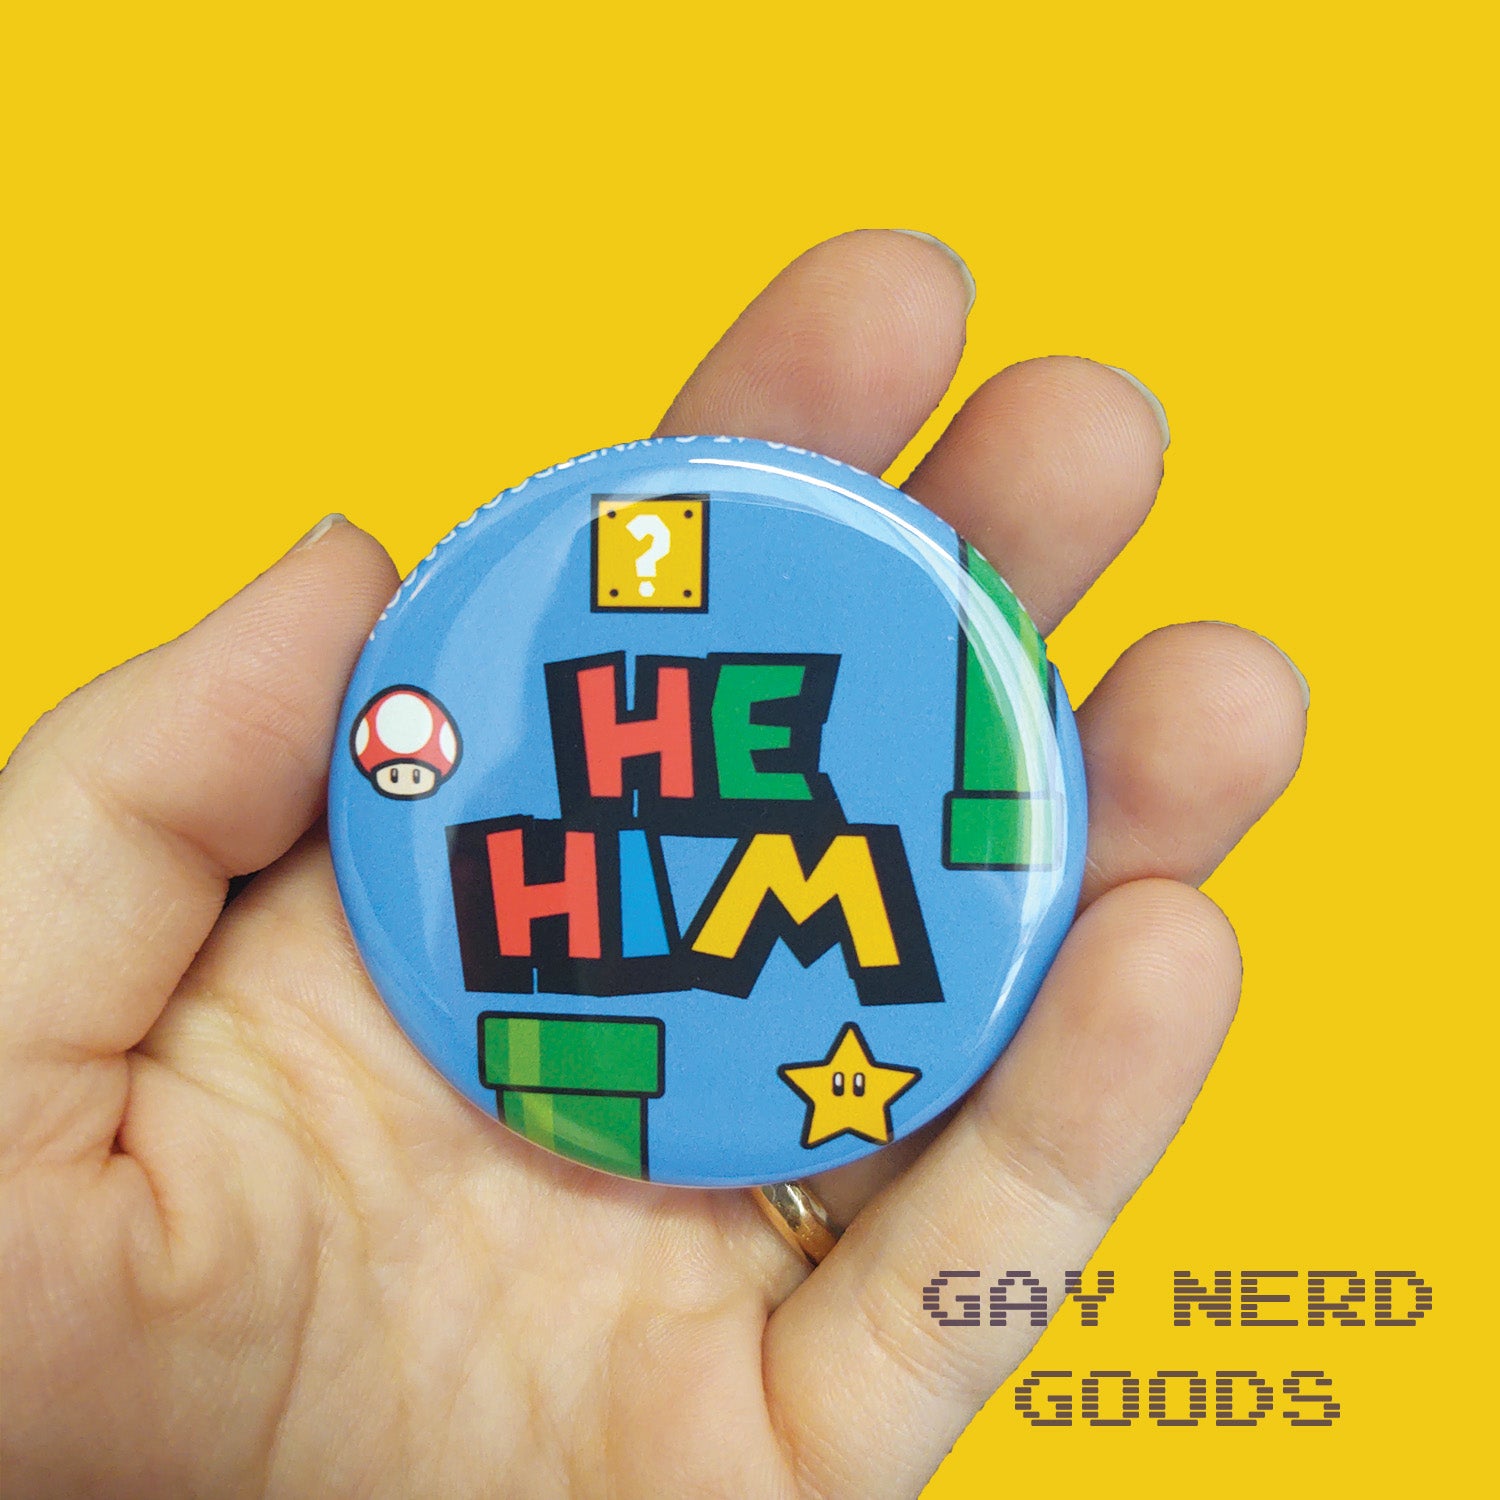 he him mario pronoun button with blue background, green pipes, question block, star, and mushroom held in a hand